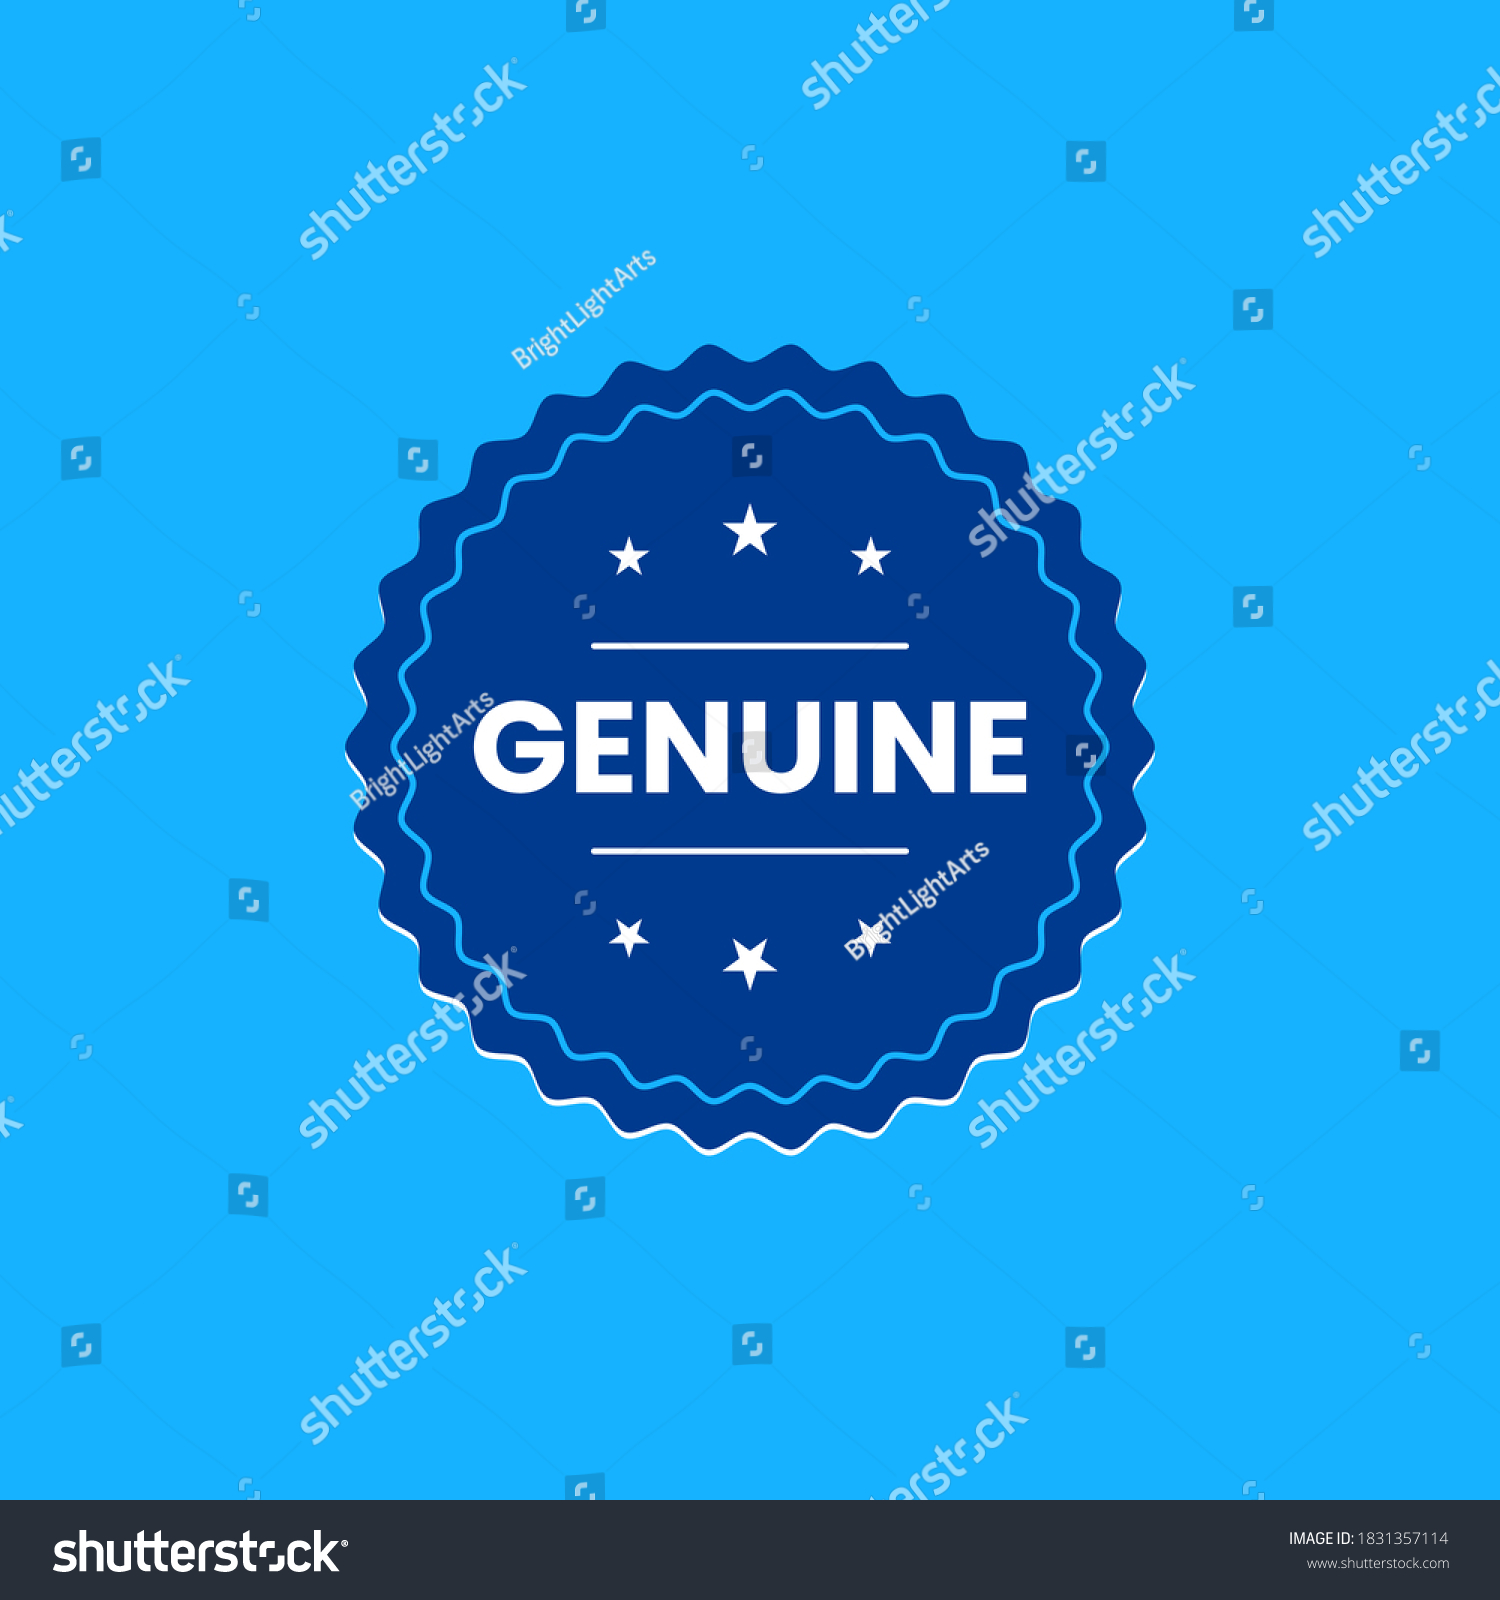 Genuine Products Items Shopping Authentic Business Badge Icon Label Vector #1831357114